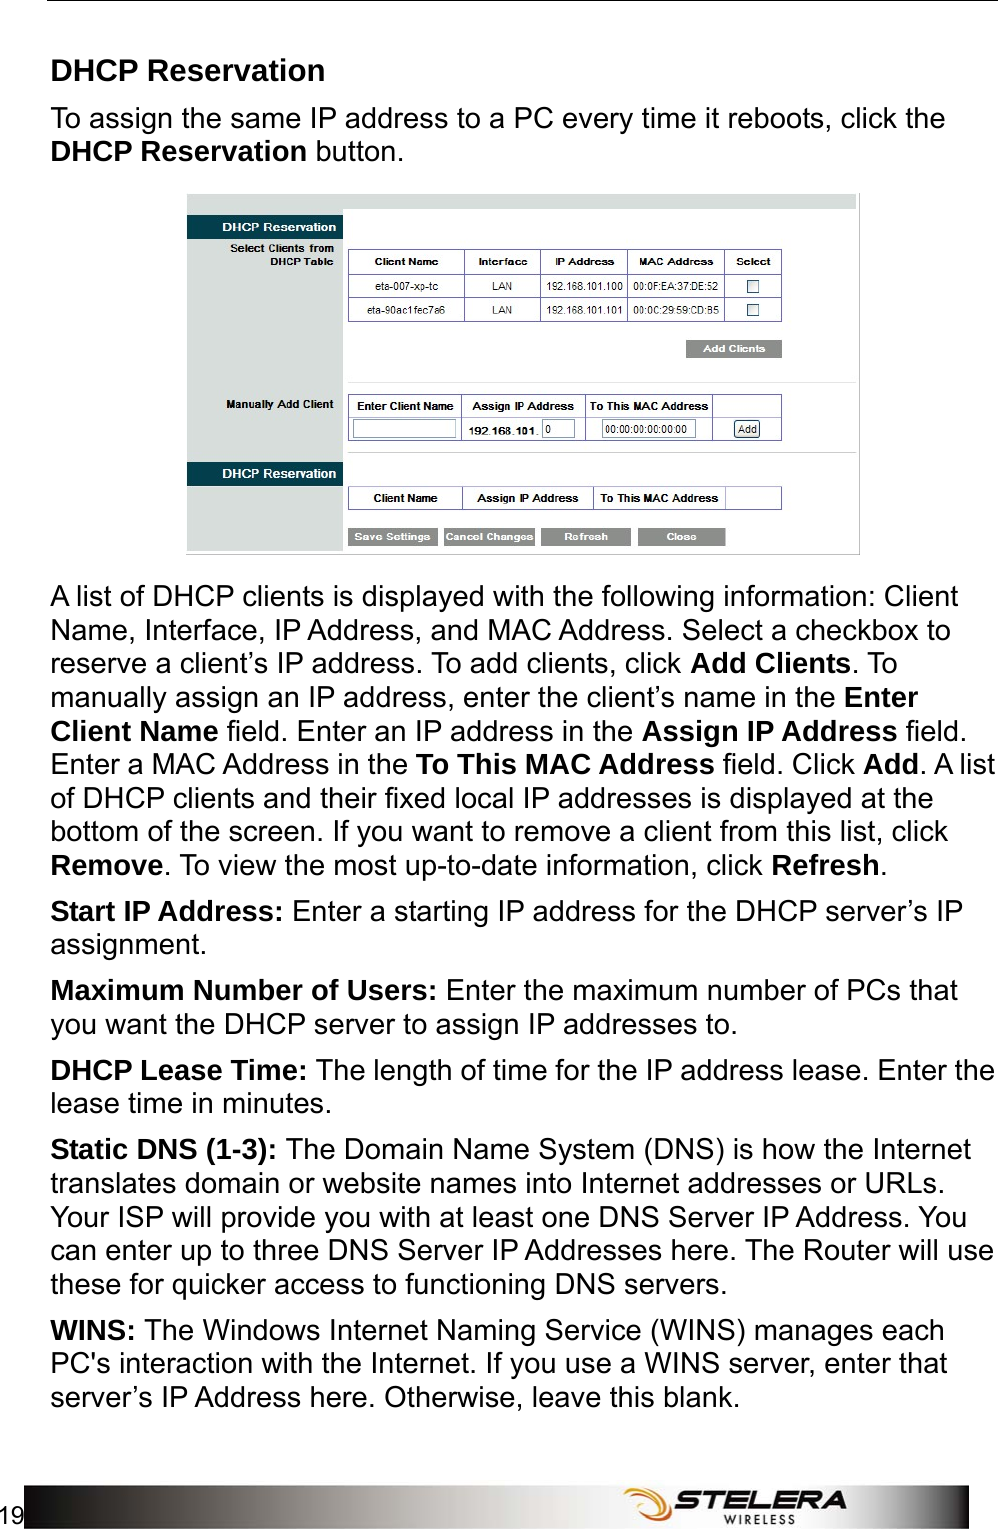  Router Setup 19  DHCP Reservation To assign the same IP address to a PC every time it reboots, click the DHCP Reservation button.  A list of DHCP clients is displayed with the following information: Client Name, Interface, IP Address, and MAC Address. Select a checkbox to reserve a client’s IP address. To add clients, click Add Clients. To manually assign an IP address, enter the client’s name in the Enter Client Name field. Enter an IP address in the Assign IP Address field. Enter a MAC Address in the To This MAC Address field. Click Add. A list of DHCP clients and their fixed local IP addresses is displayed at the bottom of the screen. If you want to remove a client from this list, click Remove. To view the most up-to-date information, click Refresh. Start IP Address: Enter a starting IP address for the DHCP server’s IP assignment. Maximum Number of Users: Enter the maximum number of PCs that you want the DHCP server to assign IP addresses to. DHCP Lease Time: The length of time for the IP address lease. Enter the lease time in minutes. Static DNS (1-3): The Domain Name System (DNS) is how the Internet translates domain or website names into Internet addresses or URLs. Your ISP will provide you with at least one DNS Server IP Address. You can enter up to three DNS Server IP Addresses here. The Router will use these for quicker access to functioning DNS servers. WINS: The Windows Internet Naming Service (WINS) manages each PC&apos;s interaction with the Internet. If you use a WINS server, enter that server’s IP Address here. Otherwise, leave this blank. 